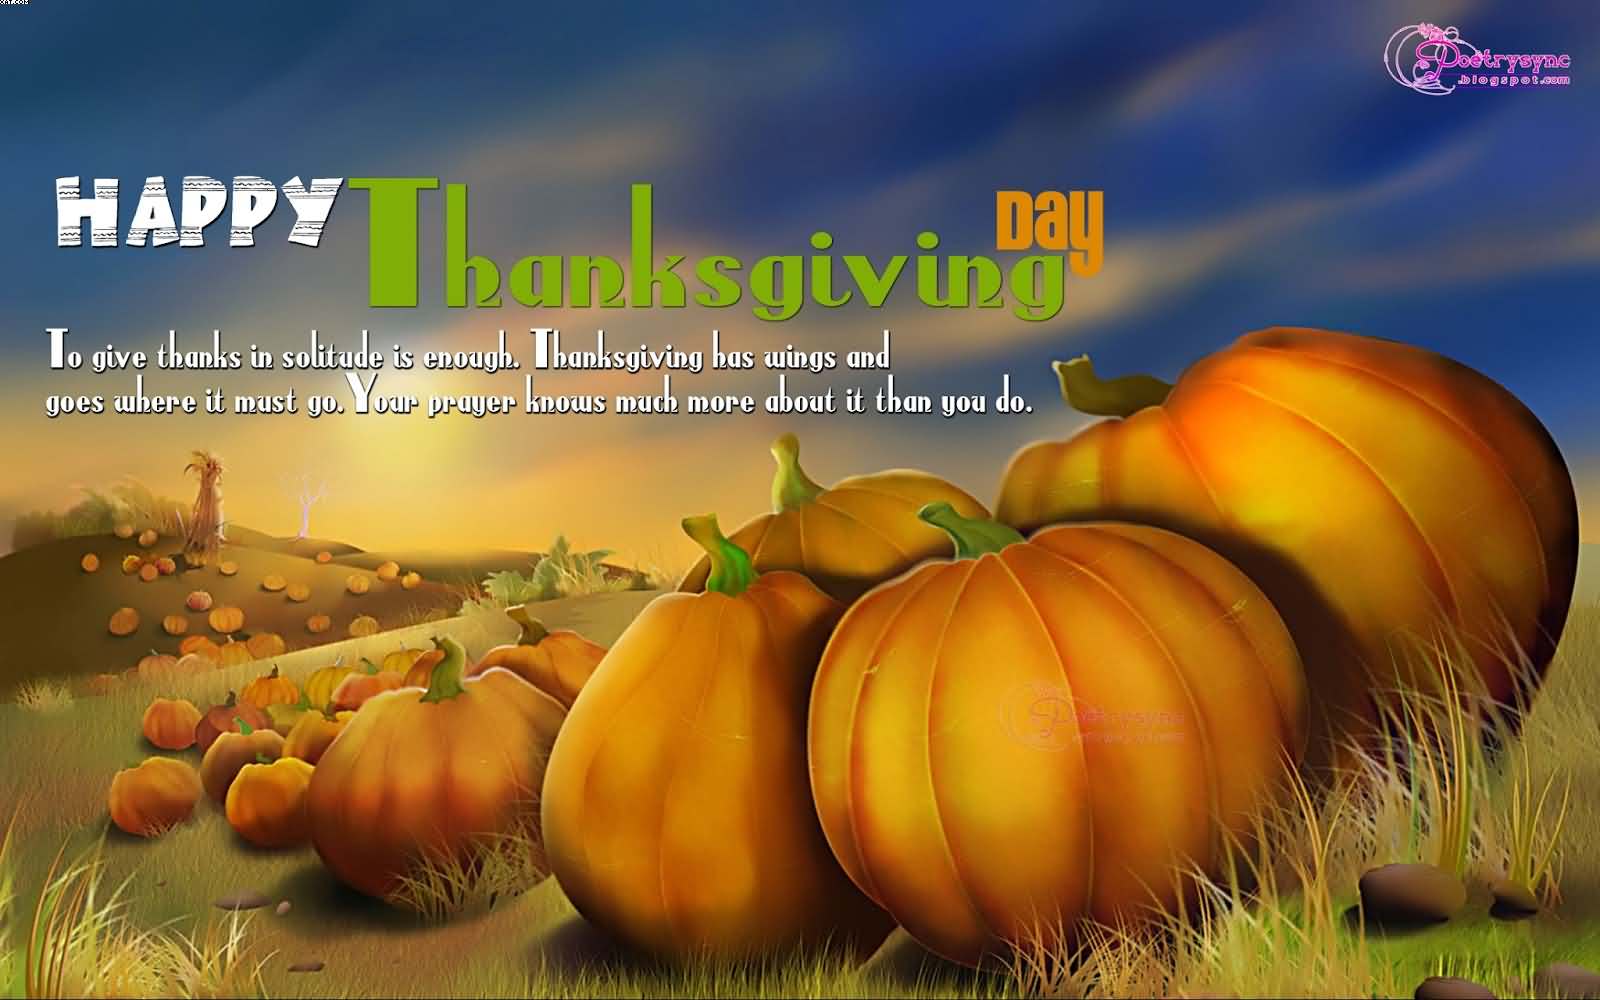 Happy thanksgiving day greetings picture